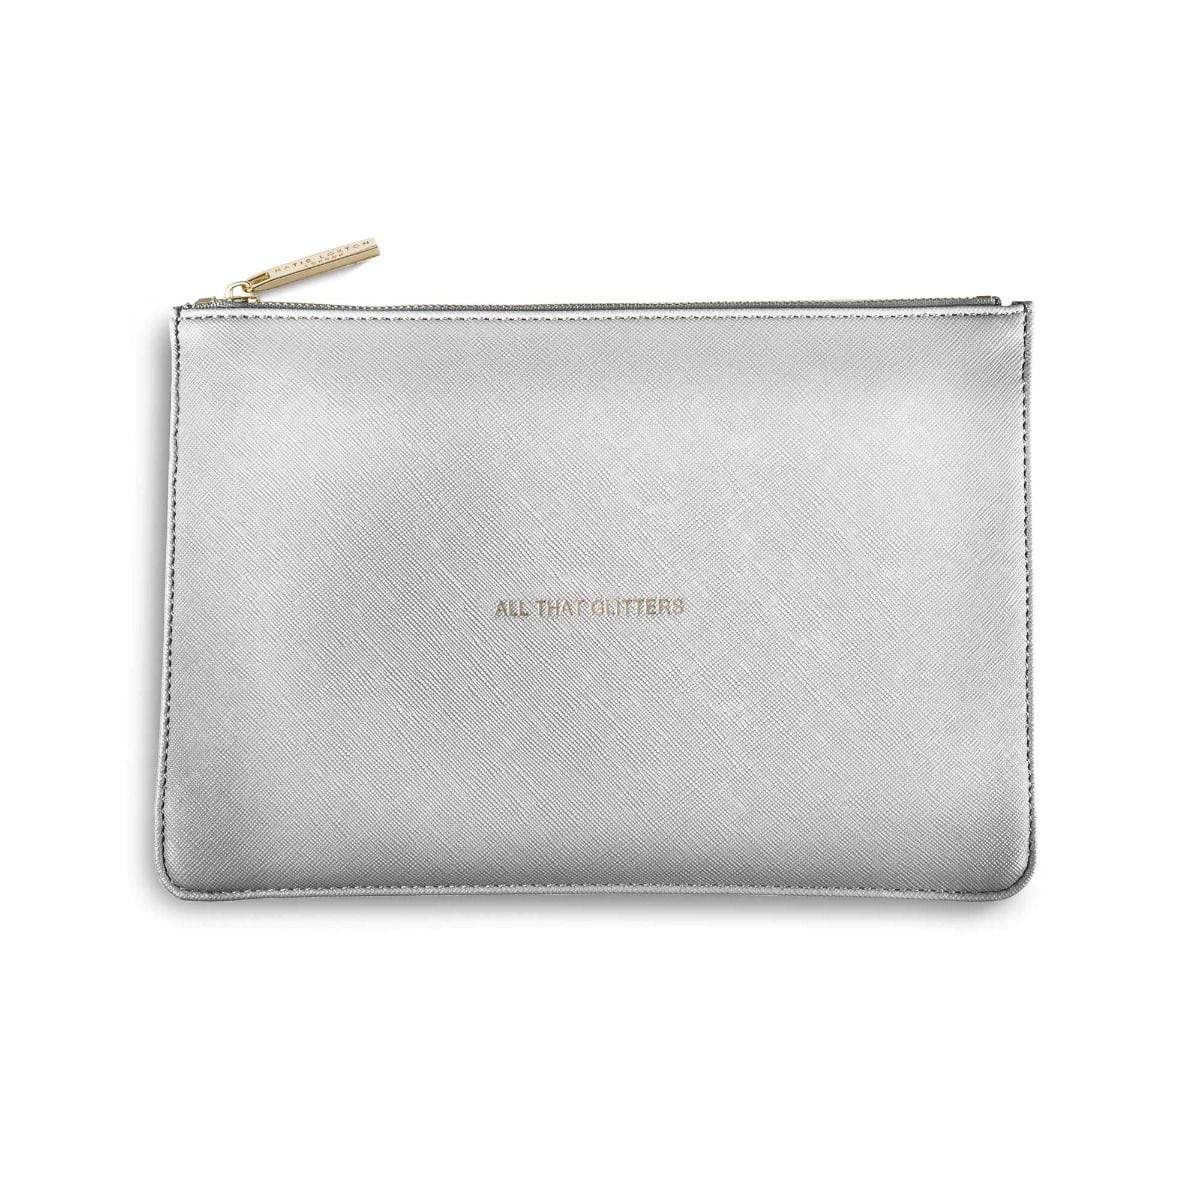 Katie Loxton Gifts One Size Katie Loxton All That Glitters Perfect Pouch in Metallic Silver KLB042 izzi-of-baslow